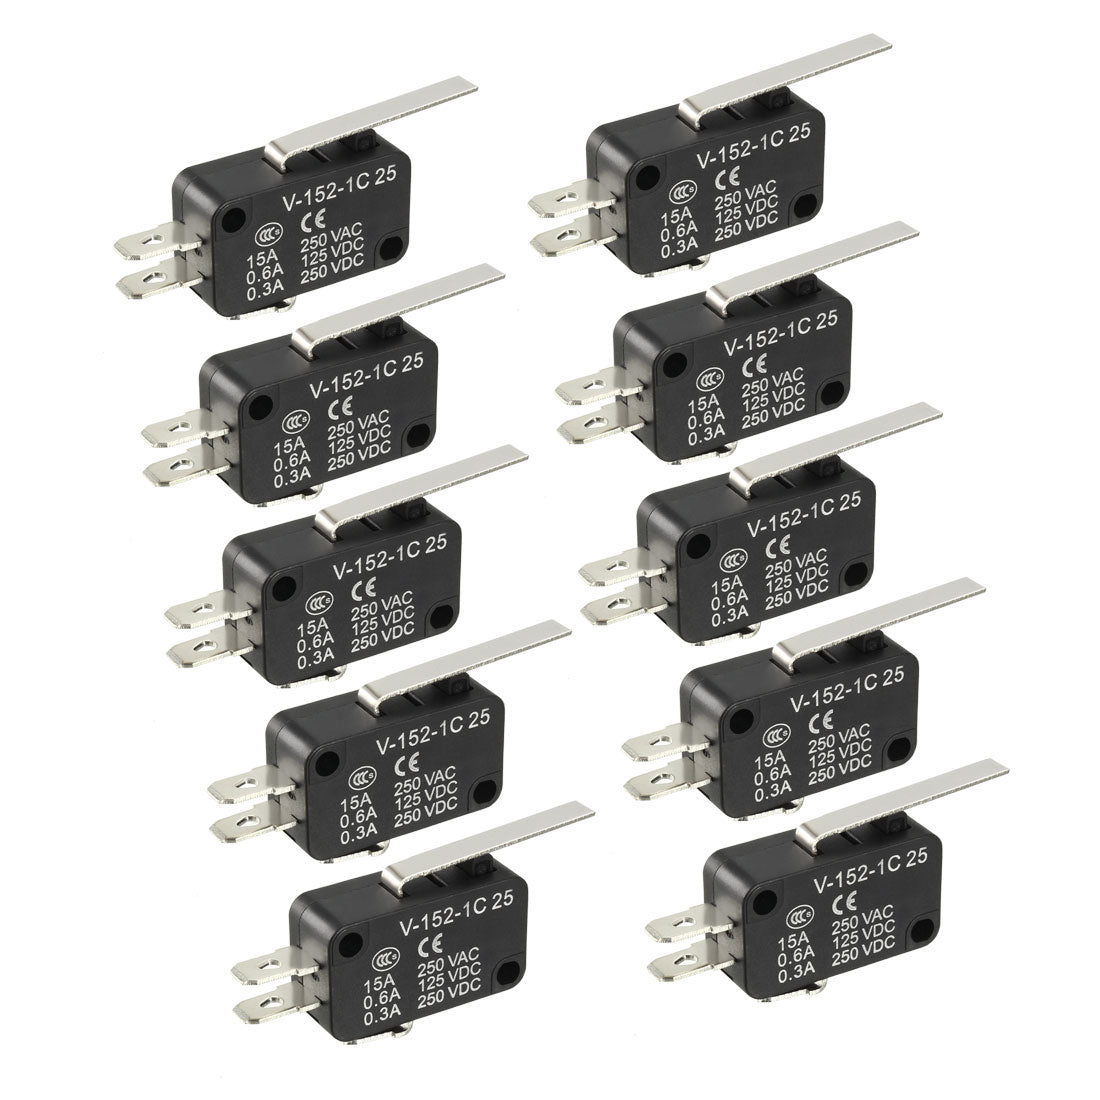 uxcell Uxcell 10PCS 15A 250VAC Black V-152-1C25 Straight Lever Miniature Micro Switch